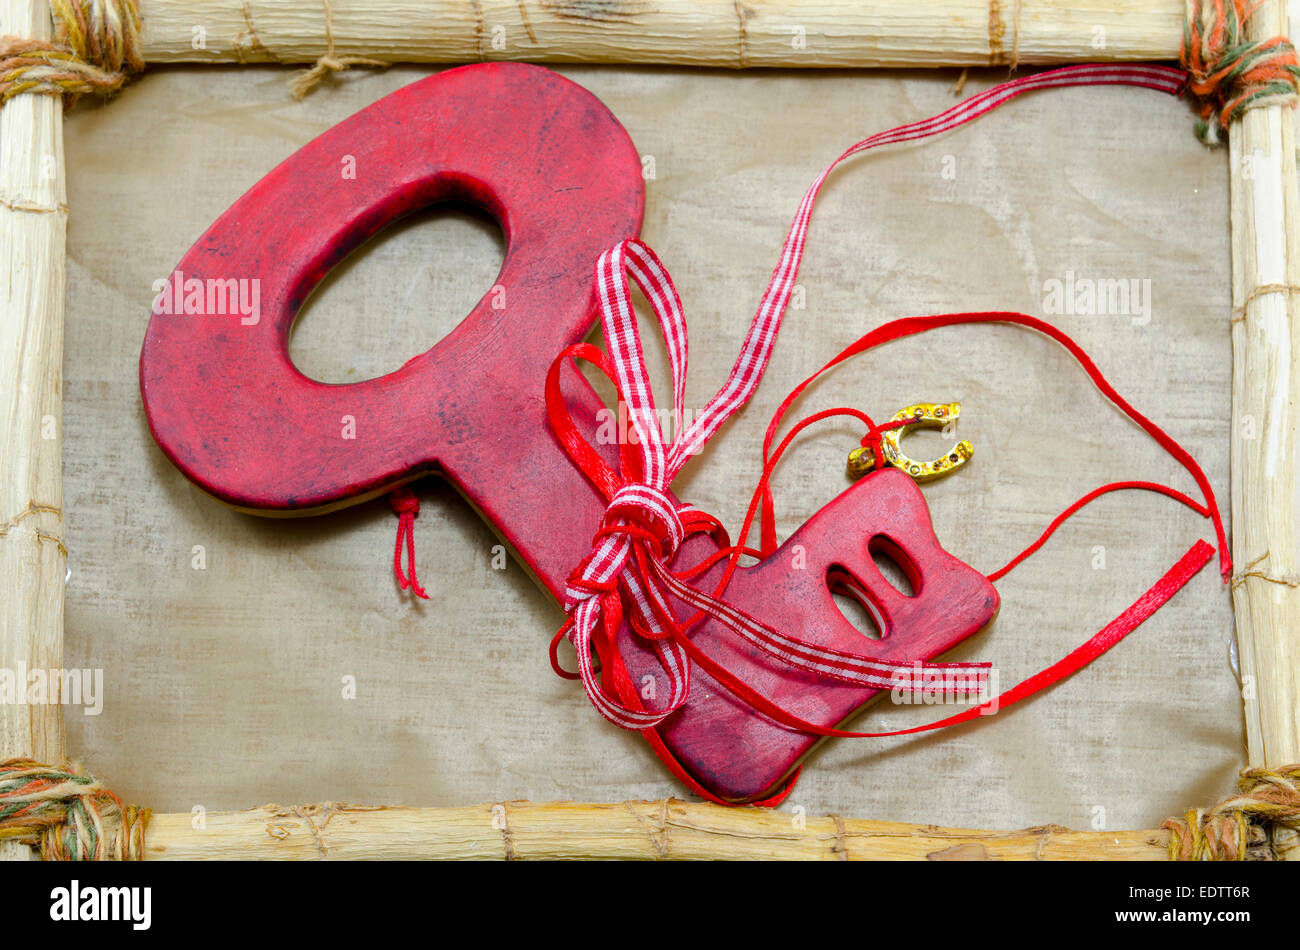 Red wooden key on a frame Stock Photo